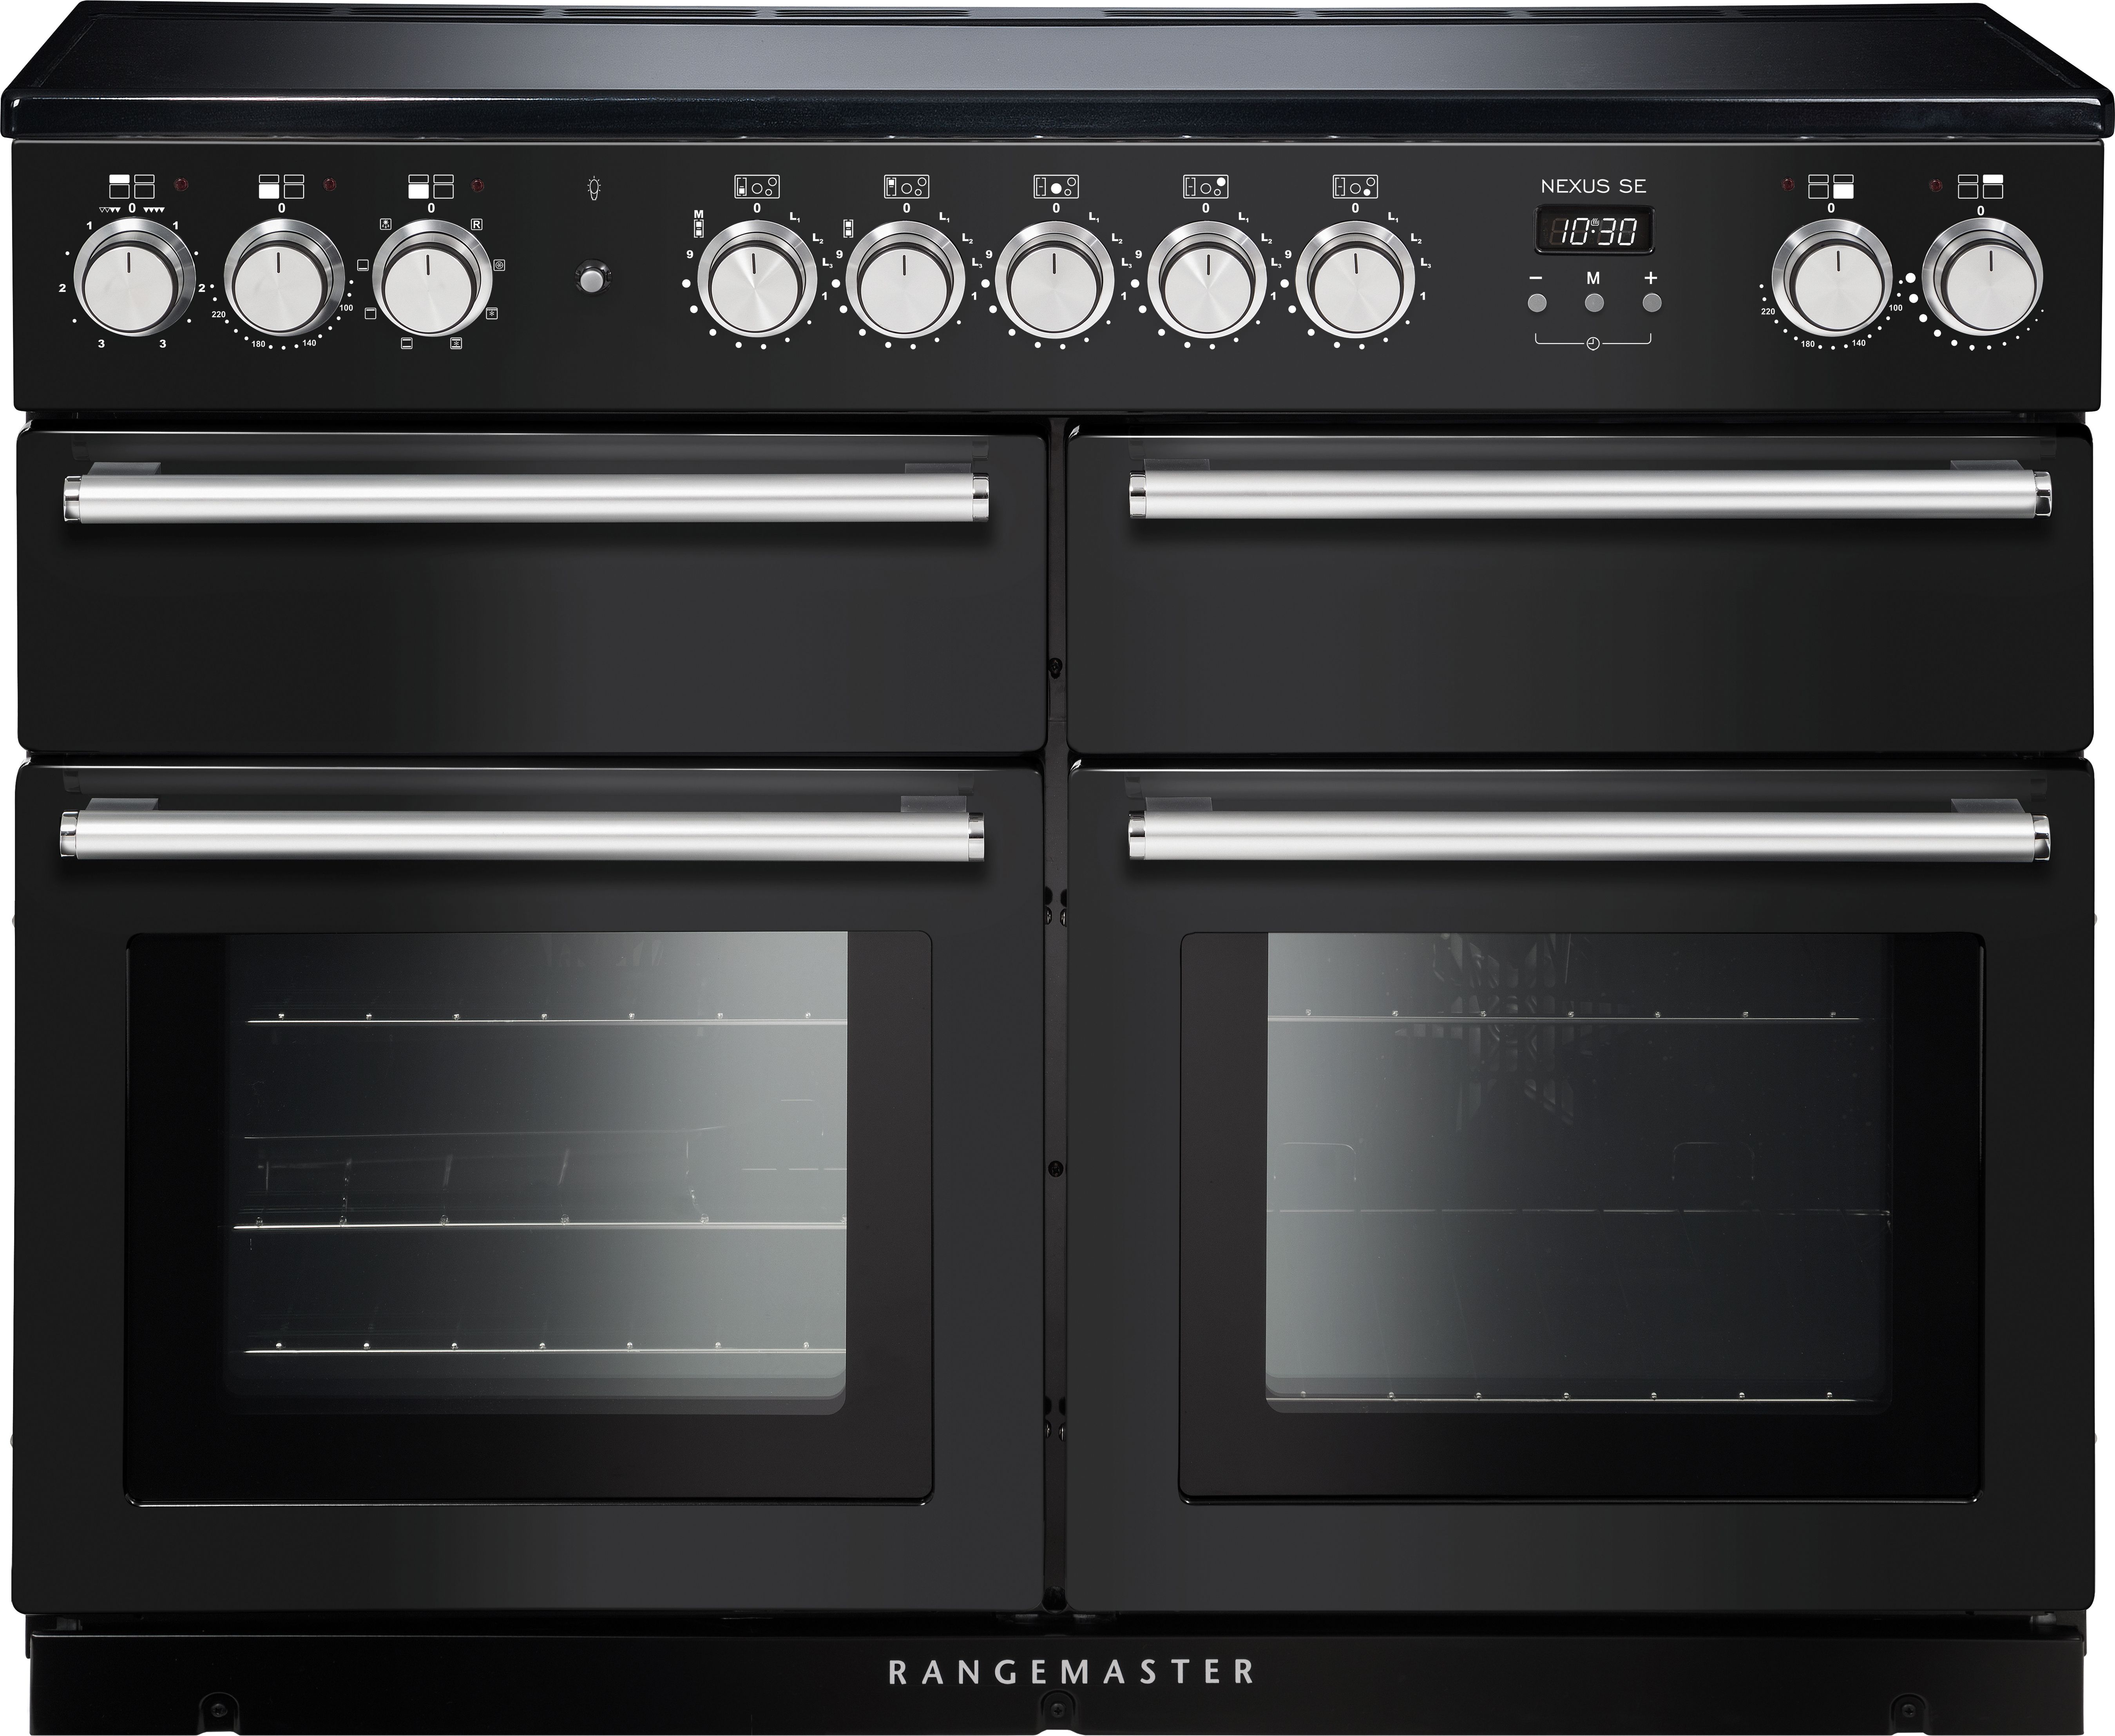 Rangemaster Nexus SE NEXSE110EICB/C 110cm Electric Range Cooker with Induction Hob - Charcoal Black - A/A/A Rated, Charcoal Black